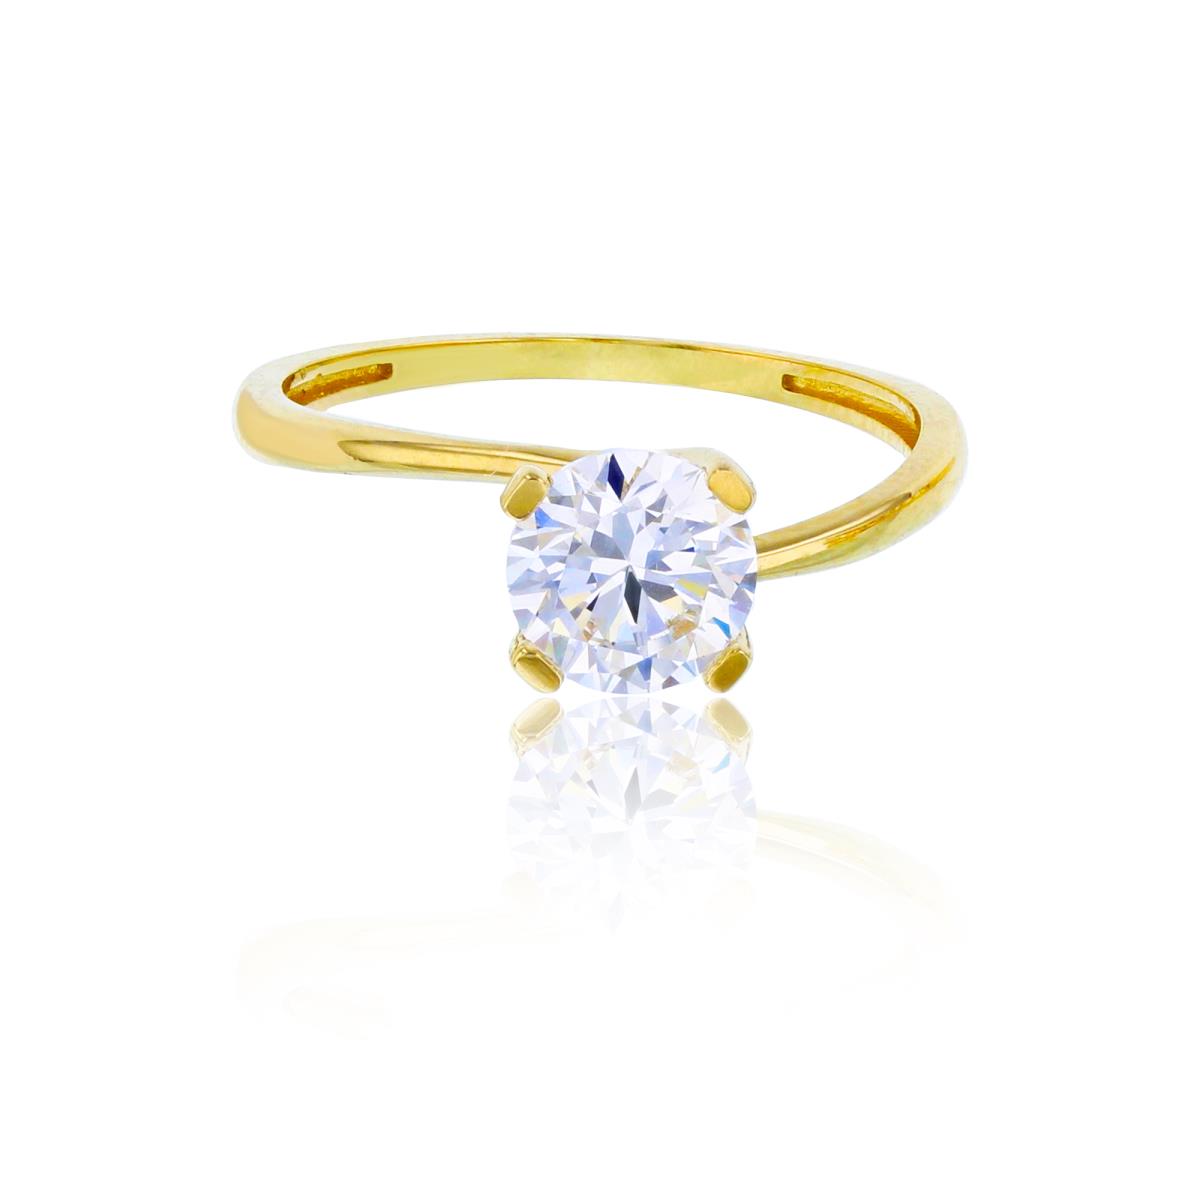 9K Yellow Gold 6.50mm Round Cut Swarovski High Polished Bypass Solitaire Ring